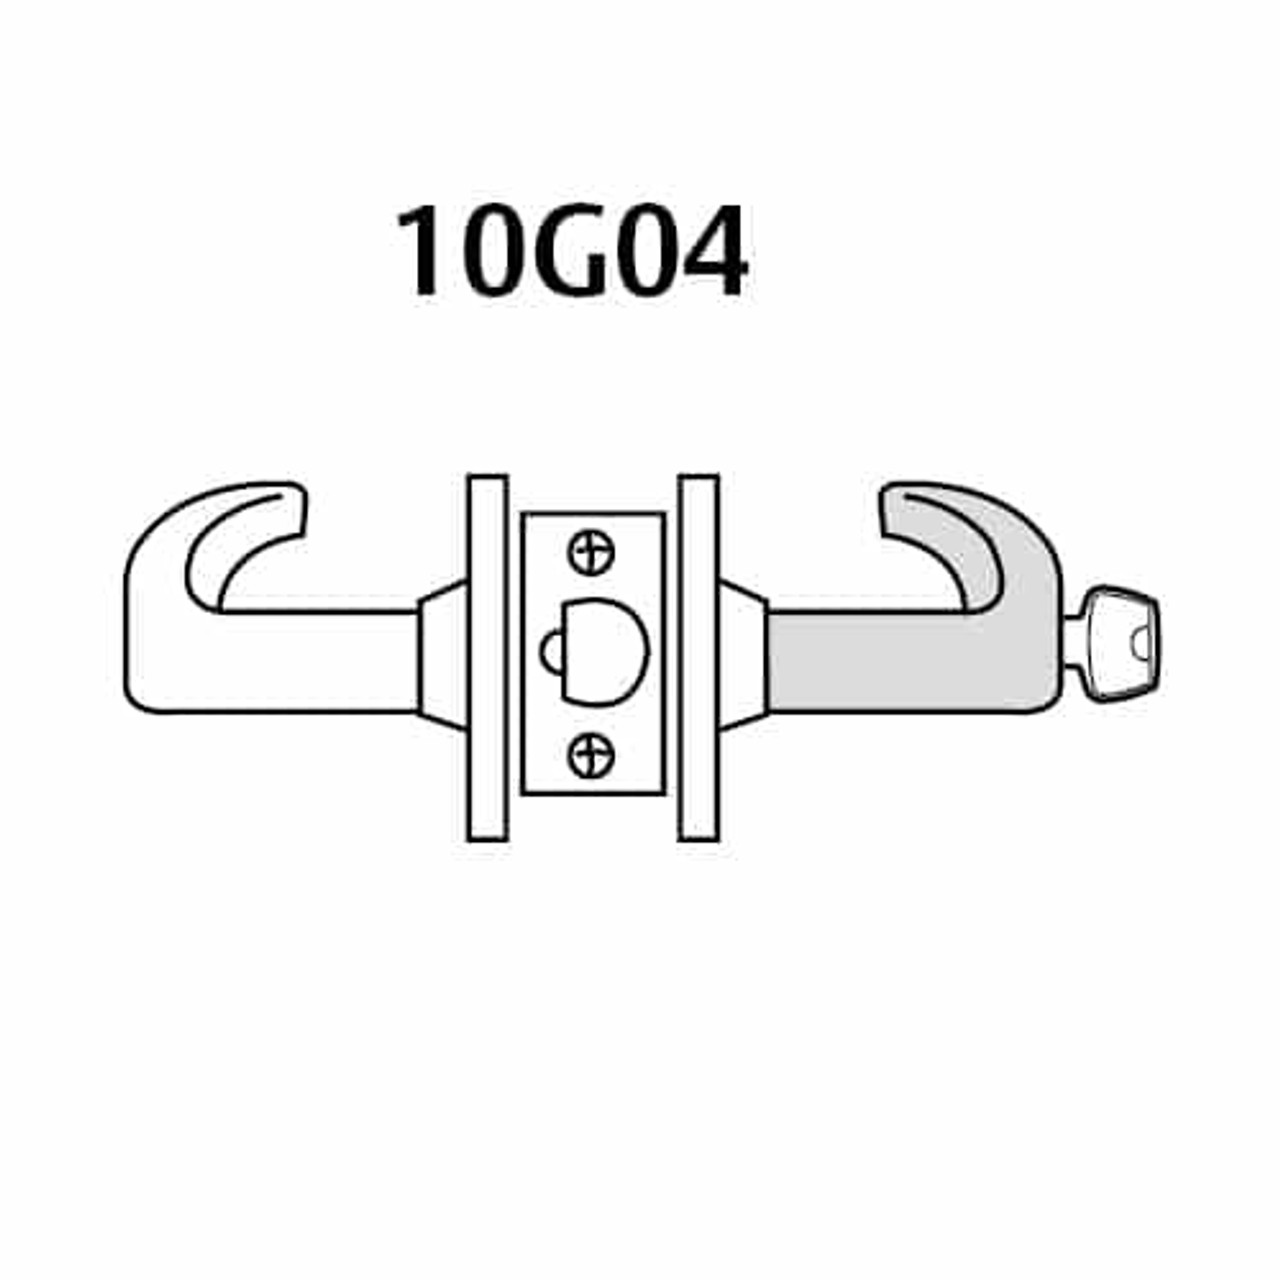 2870-10G04-GB-10B Sargent 10 Line Cylindrical Storeroom/Closet Locks with B Lever Design and G Rose Prepped for SFIC in Oxidized Dull Bronze